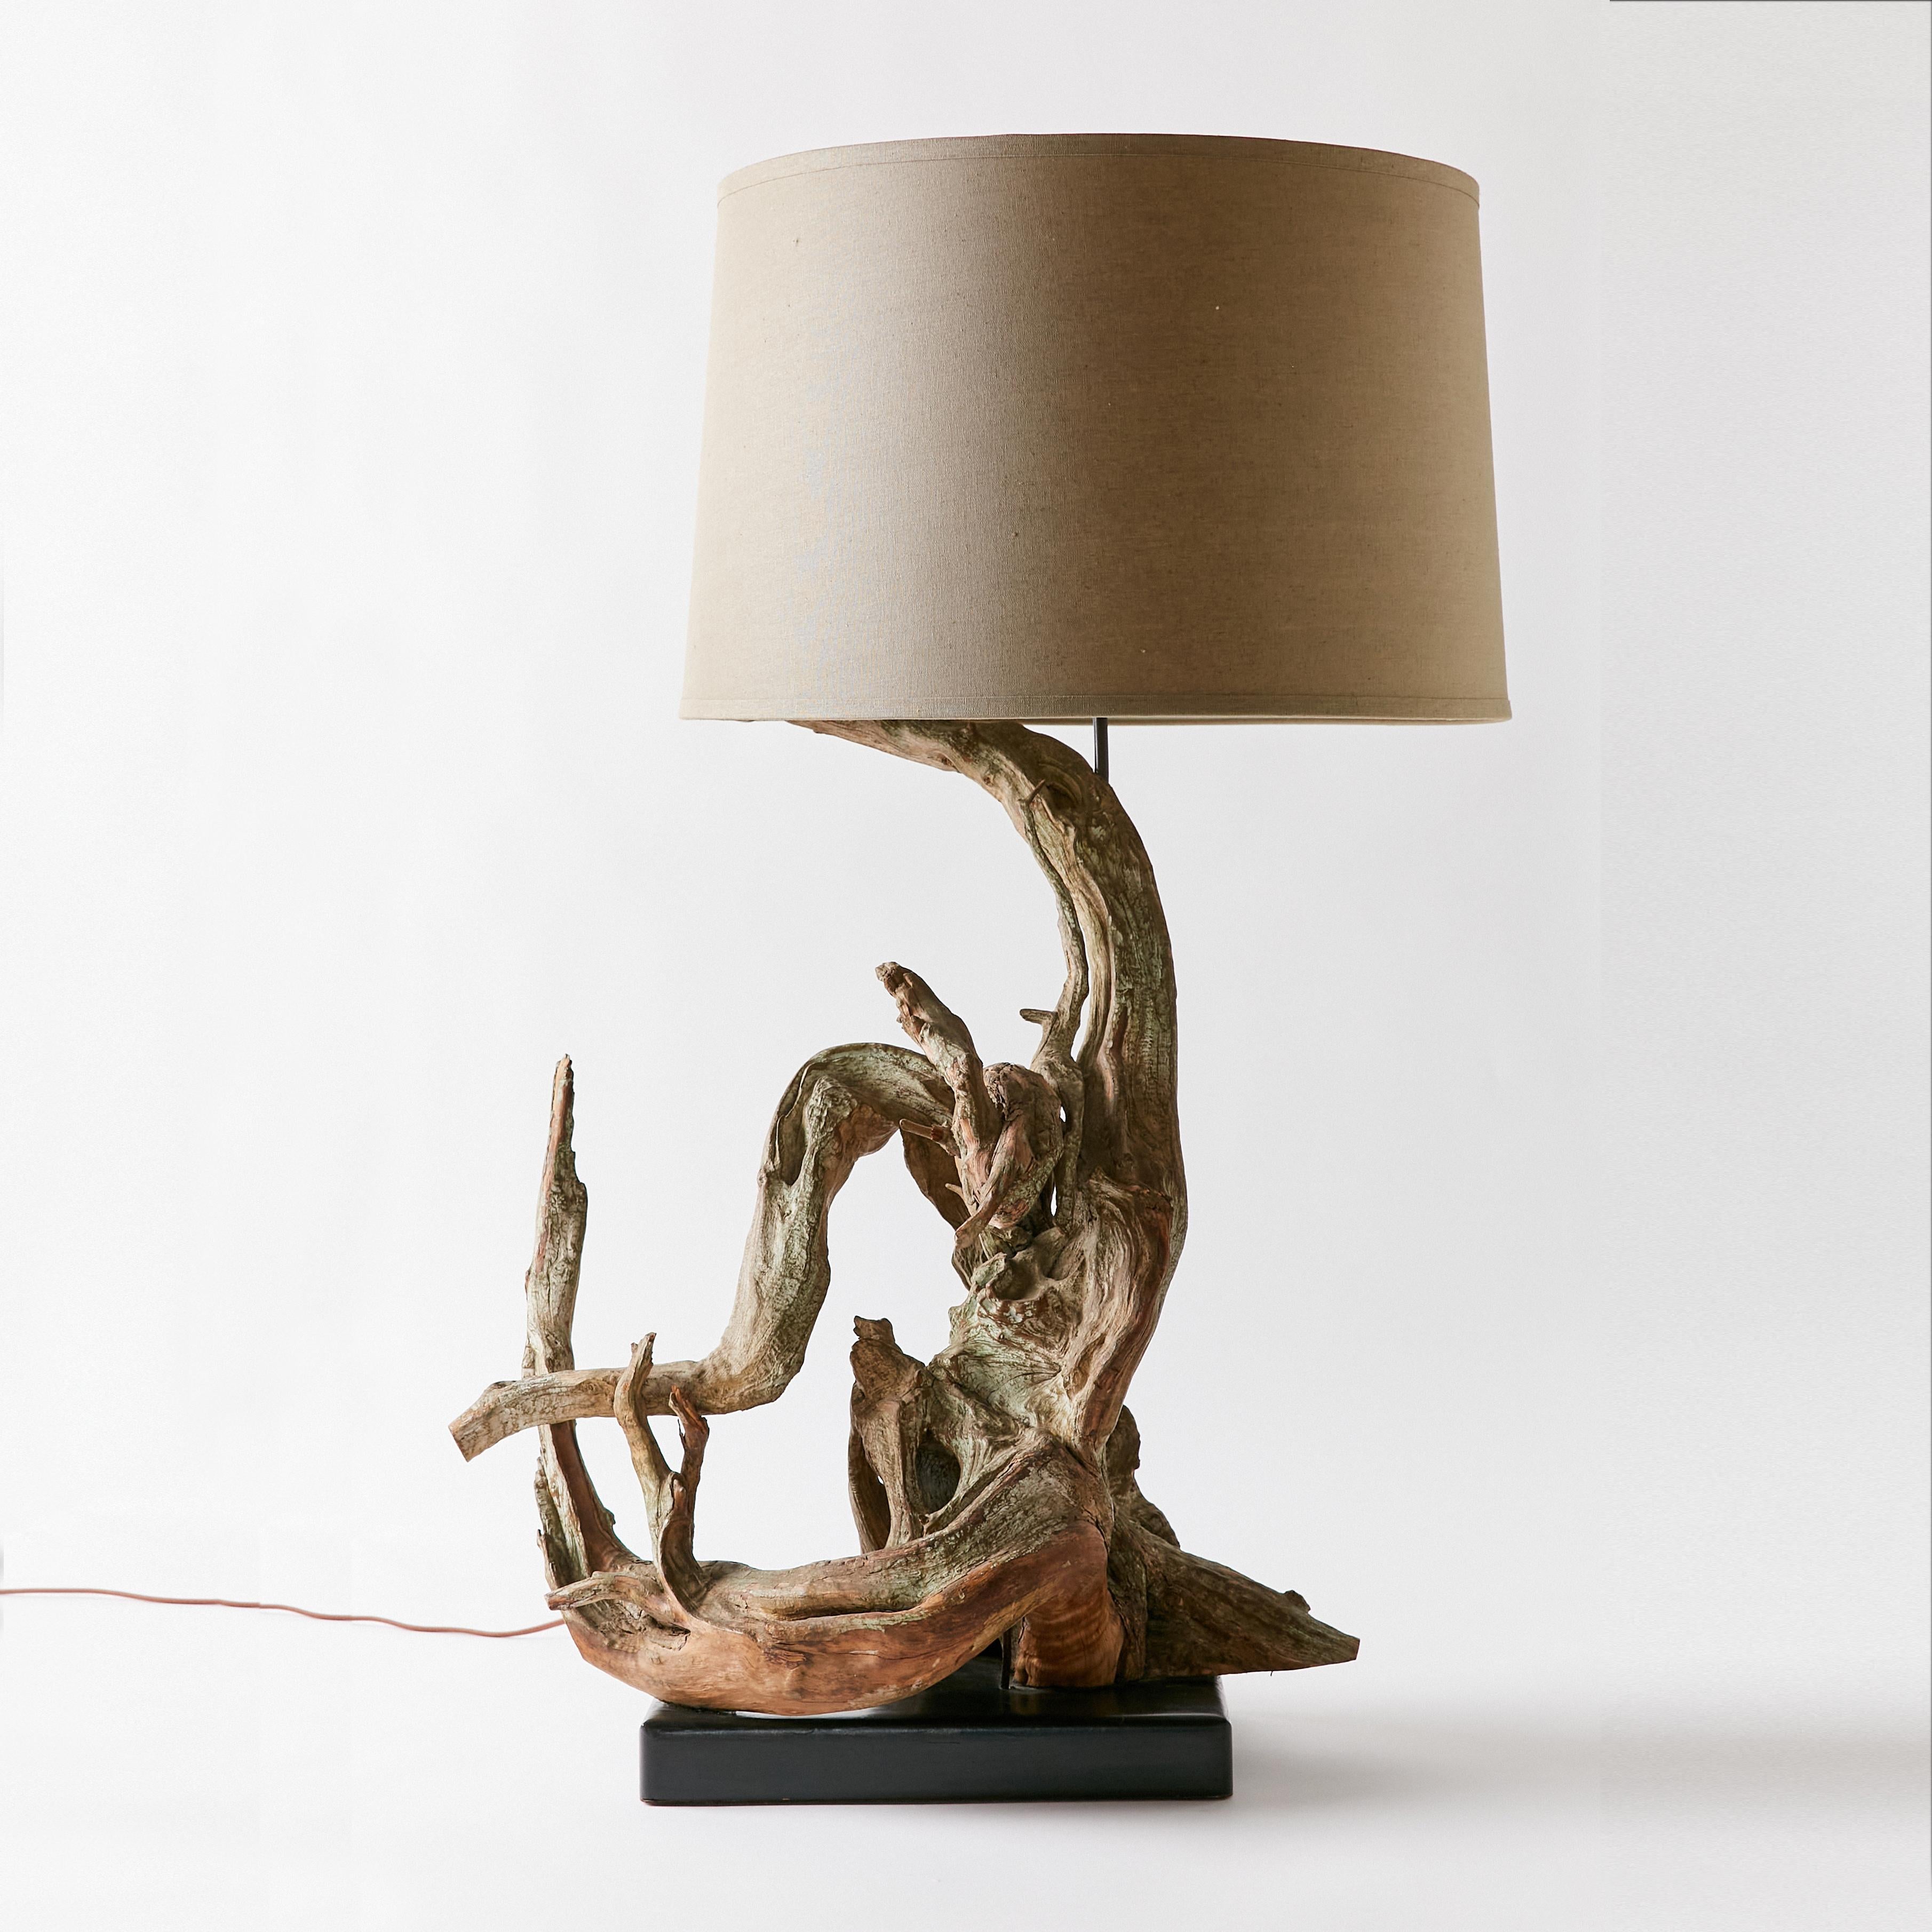 Sculptural mid-century driftwood lamp with wooden base. It shows a well-worn natural patina. This item has been rewired with new braided cloth cord and hardware. This lamp does not include shade or harp.